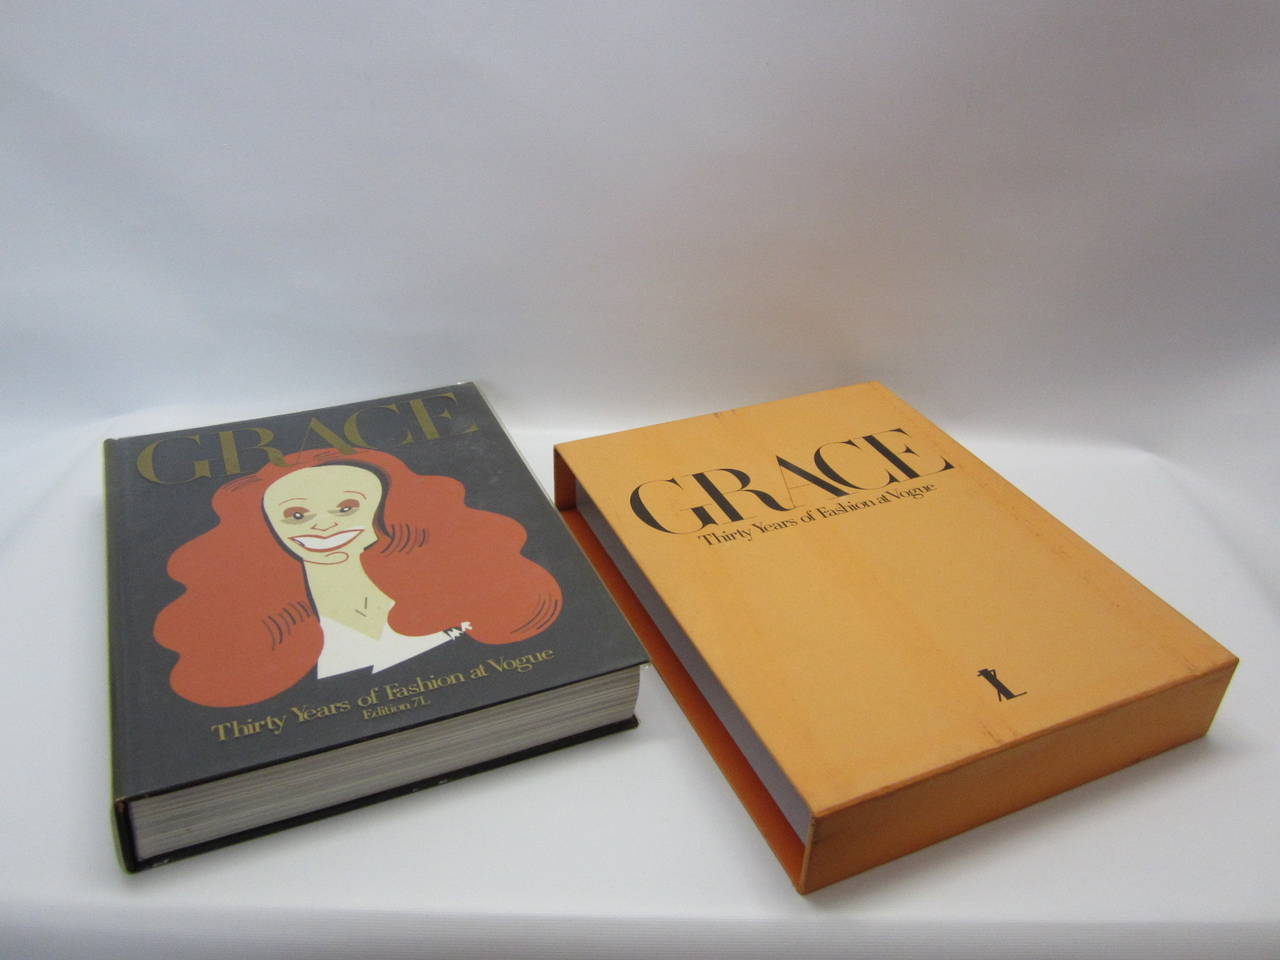 Paper Grace, Thirty Years of Fashion at Vogue, First Edition Book in Original Box  For Sale